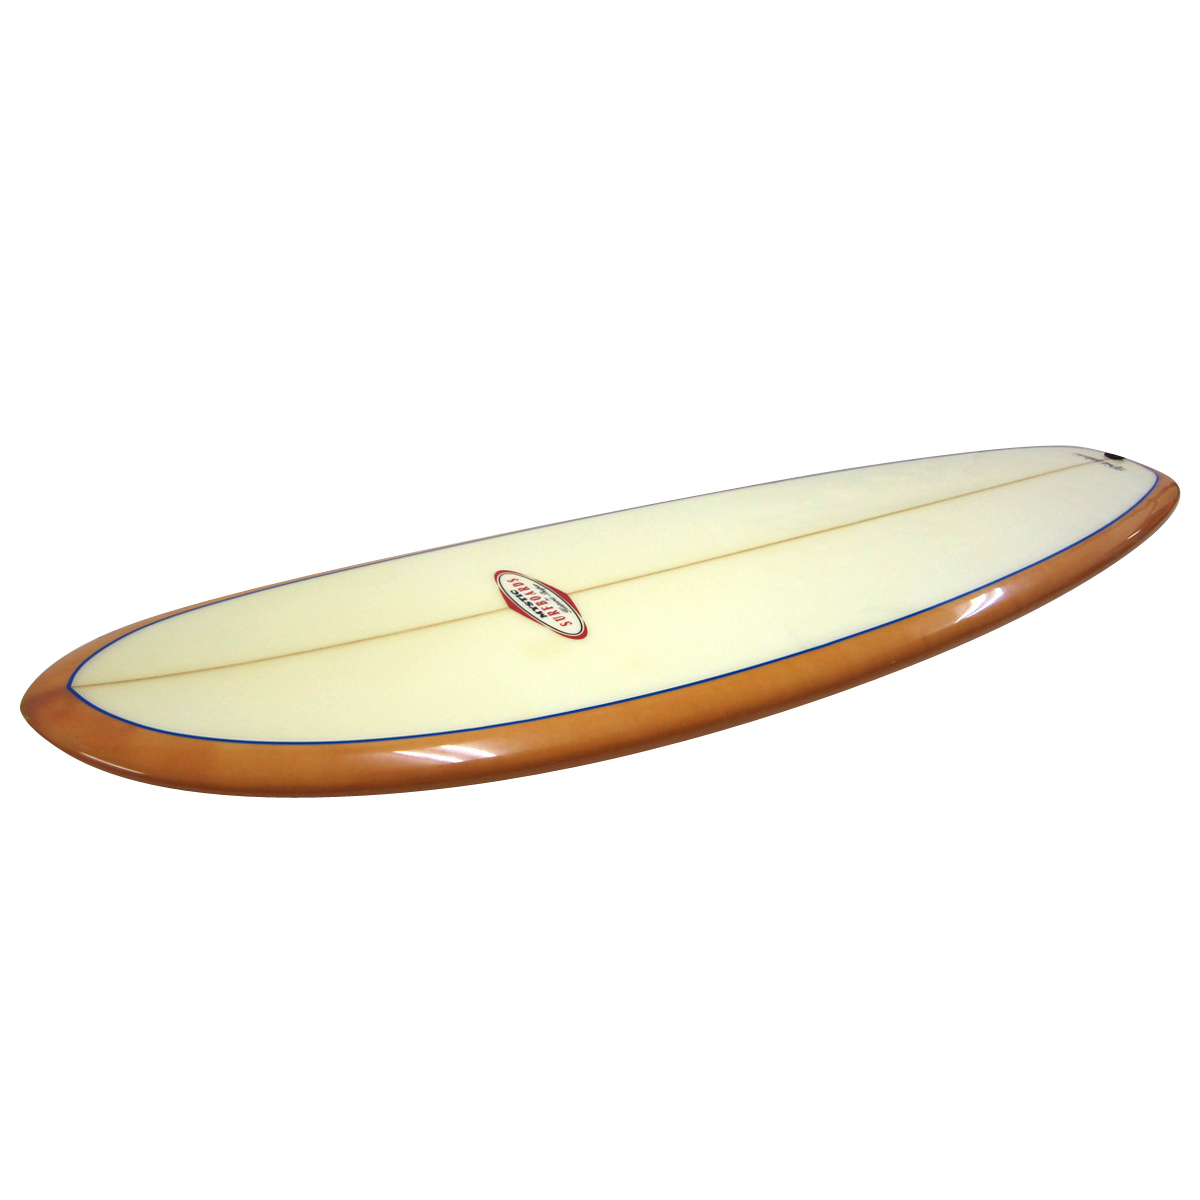 MYSTIC SURFBOARDS / 6`0 Mini Shaped By Paul Hutchison 